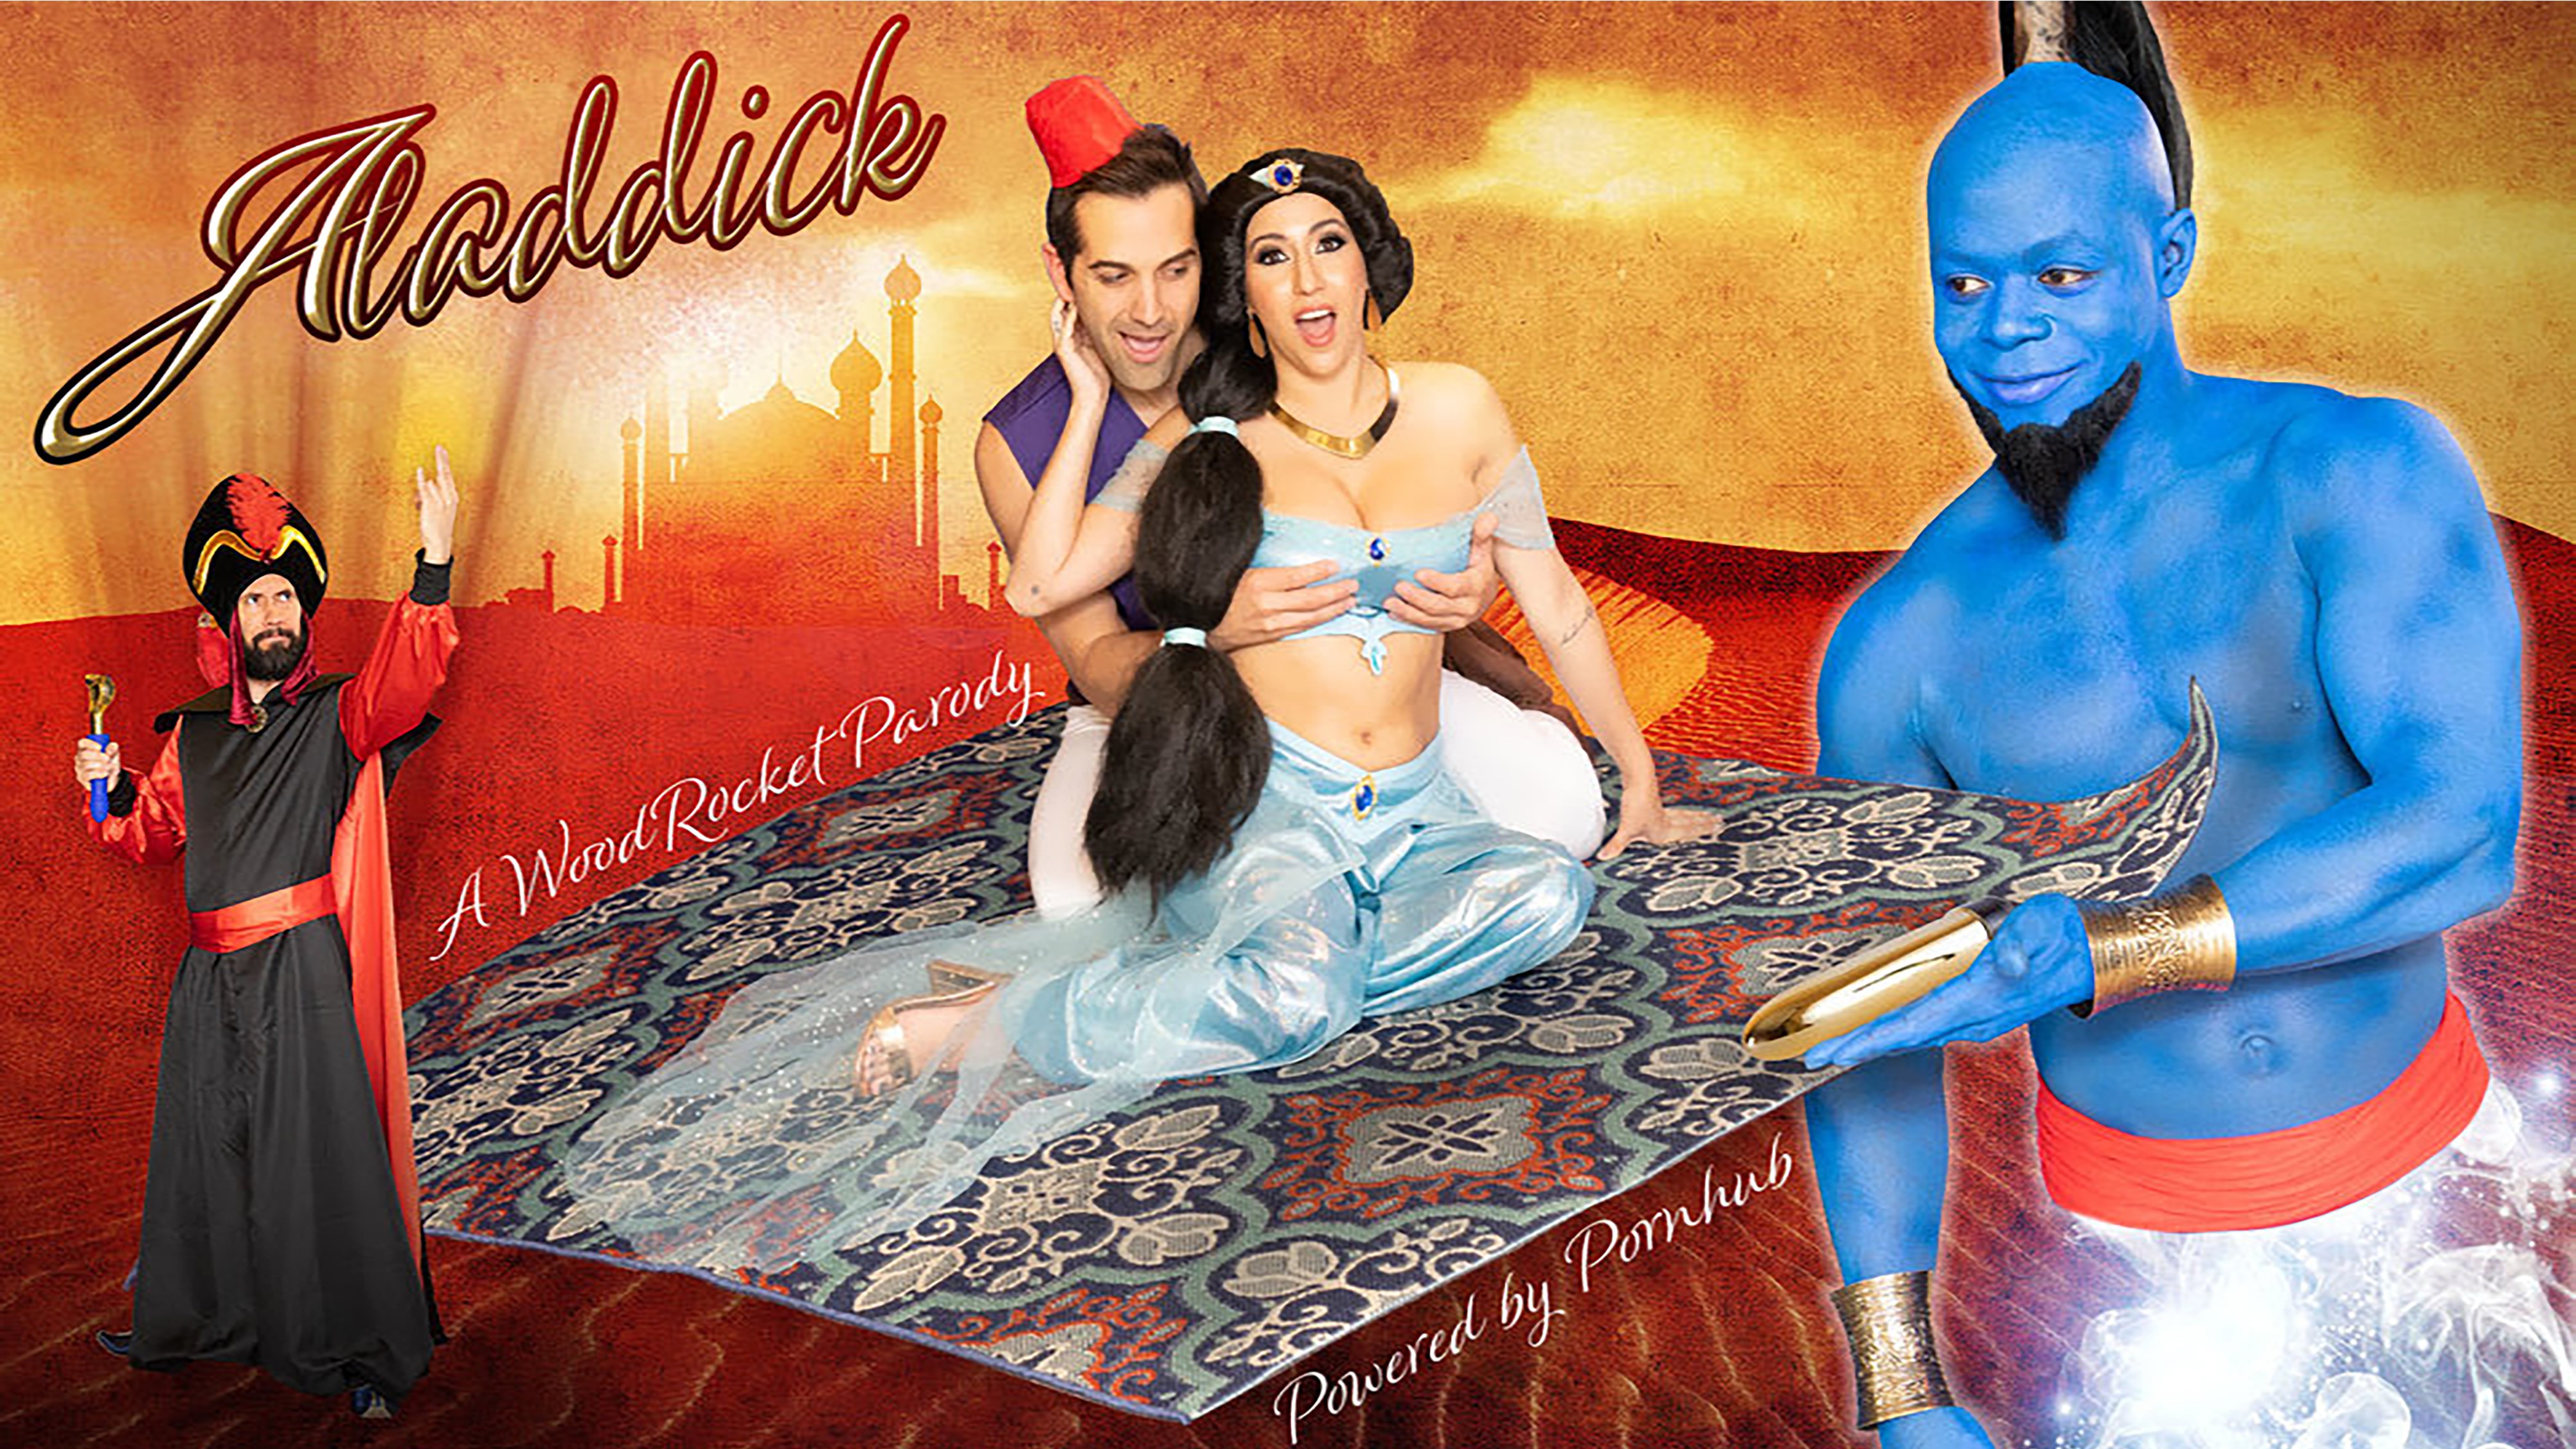 Xxx Puns Video - The 'Aladdin' Porn Parody Is Here and We Fixed Its Title - VICE